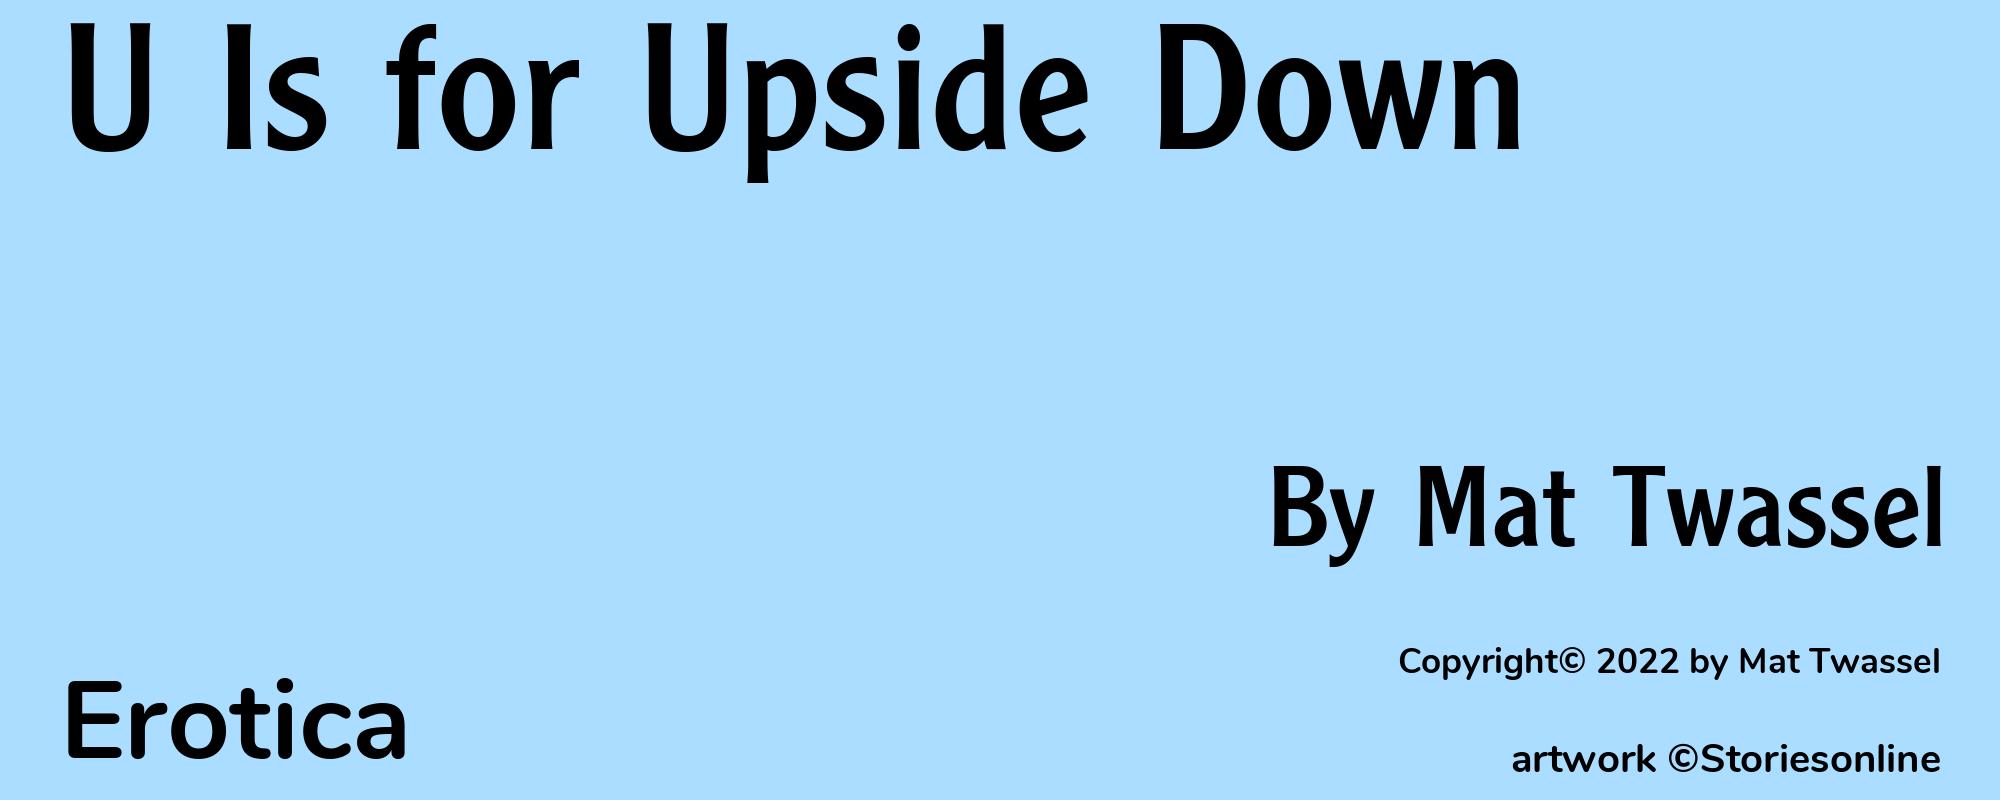 U Is for Upside Down - Cover